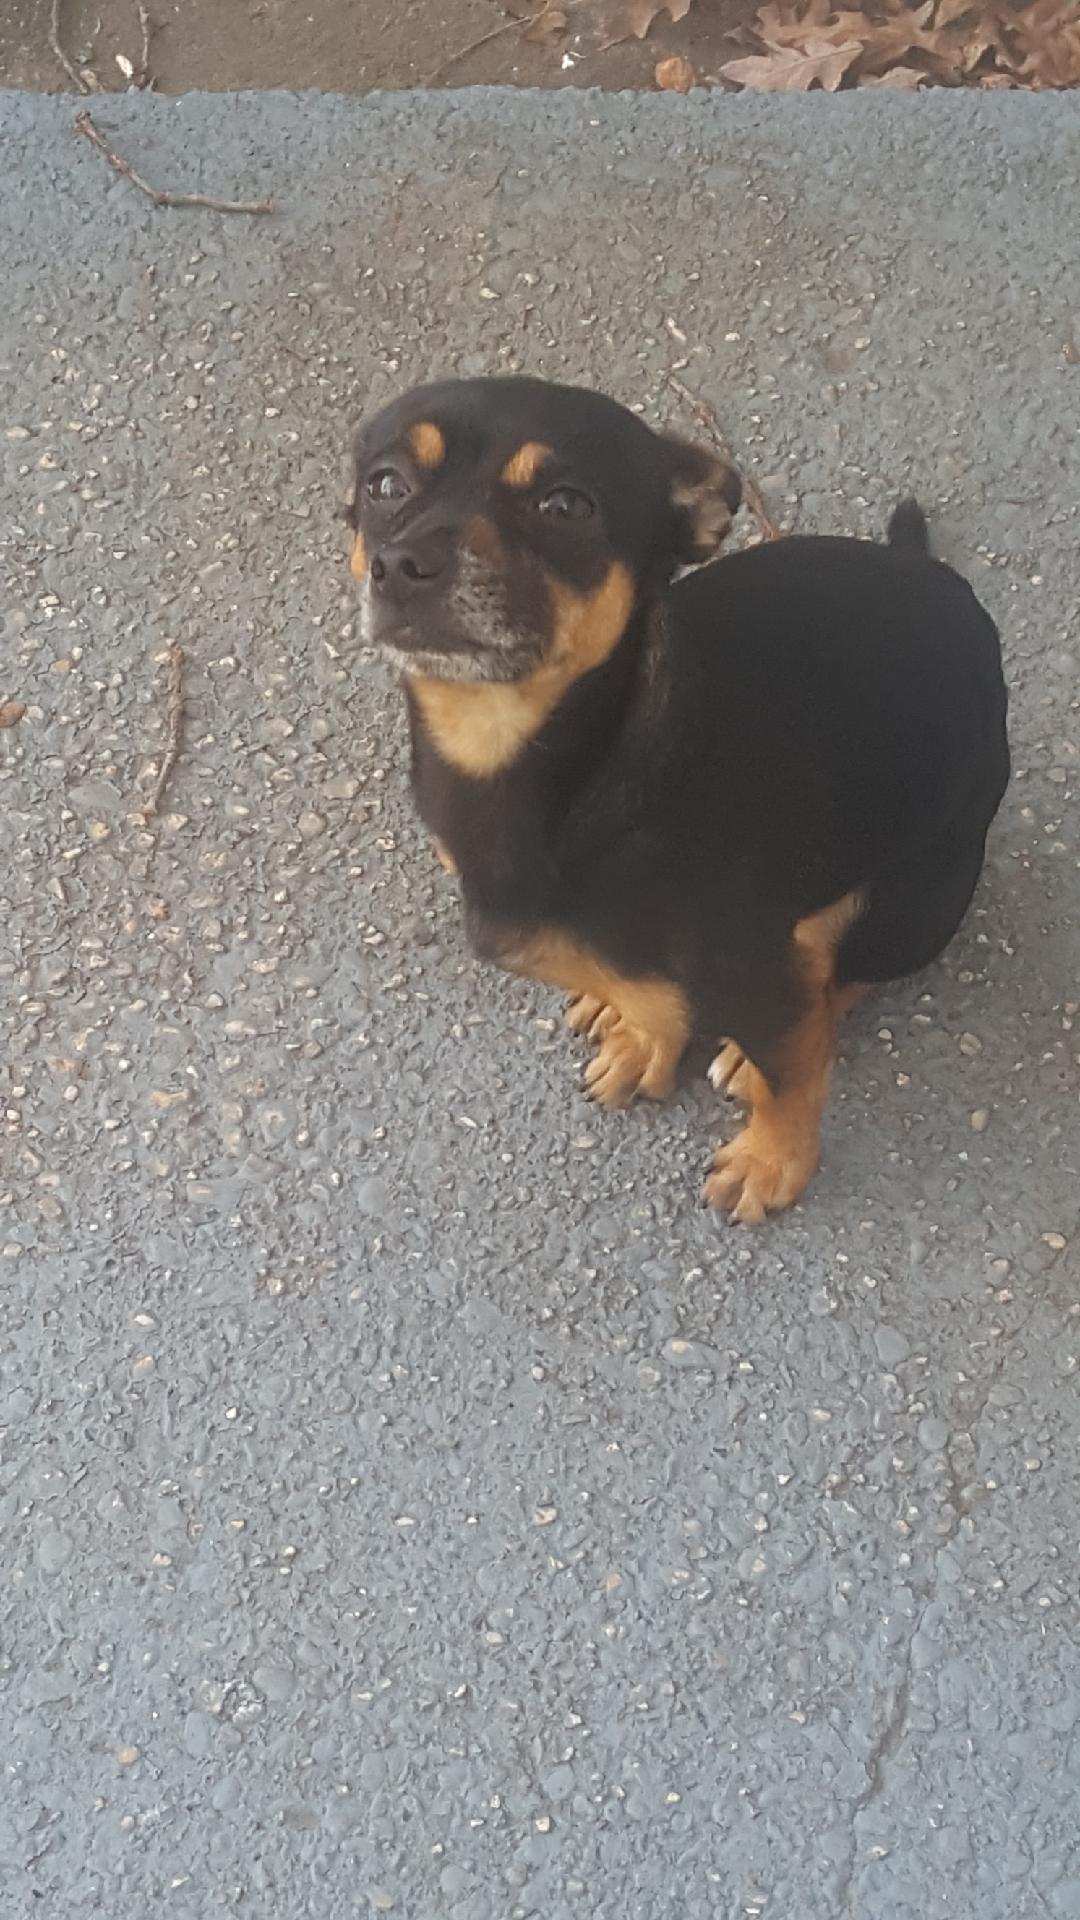 Image of Puppy or brim, Lost Dog